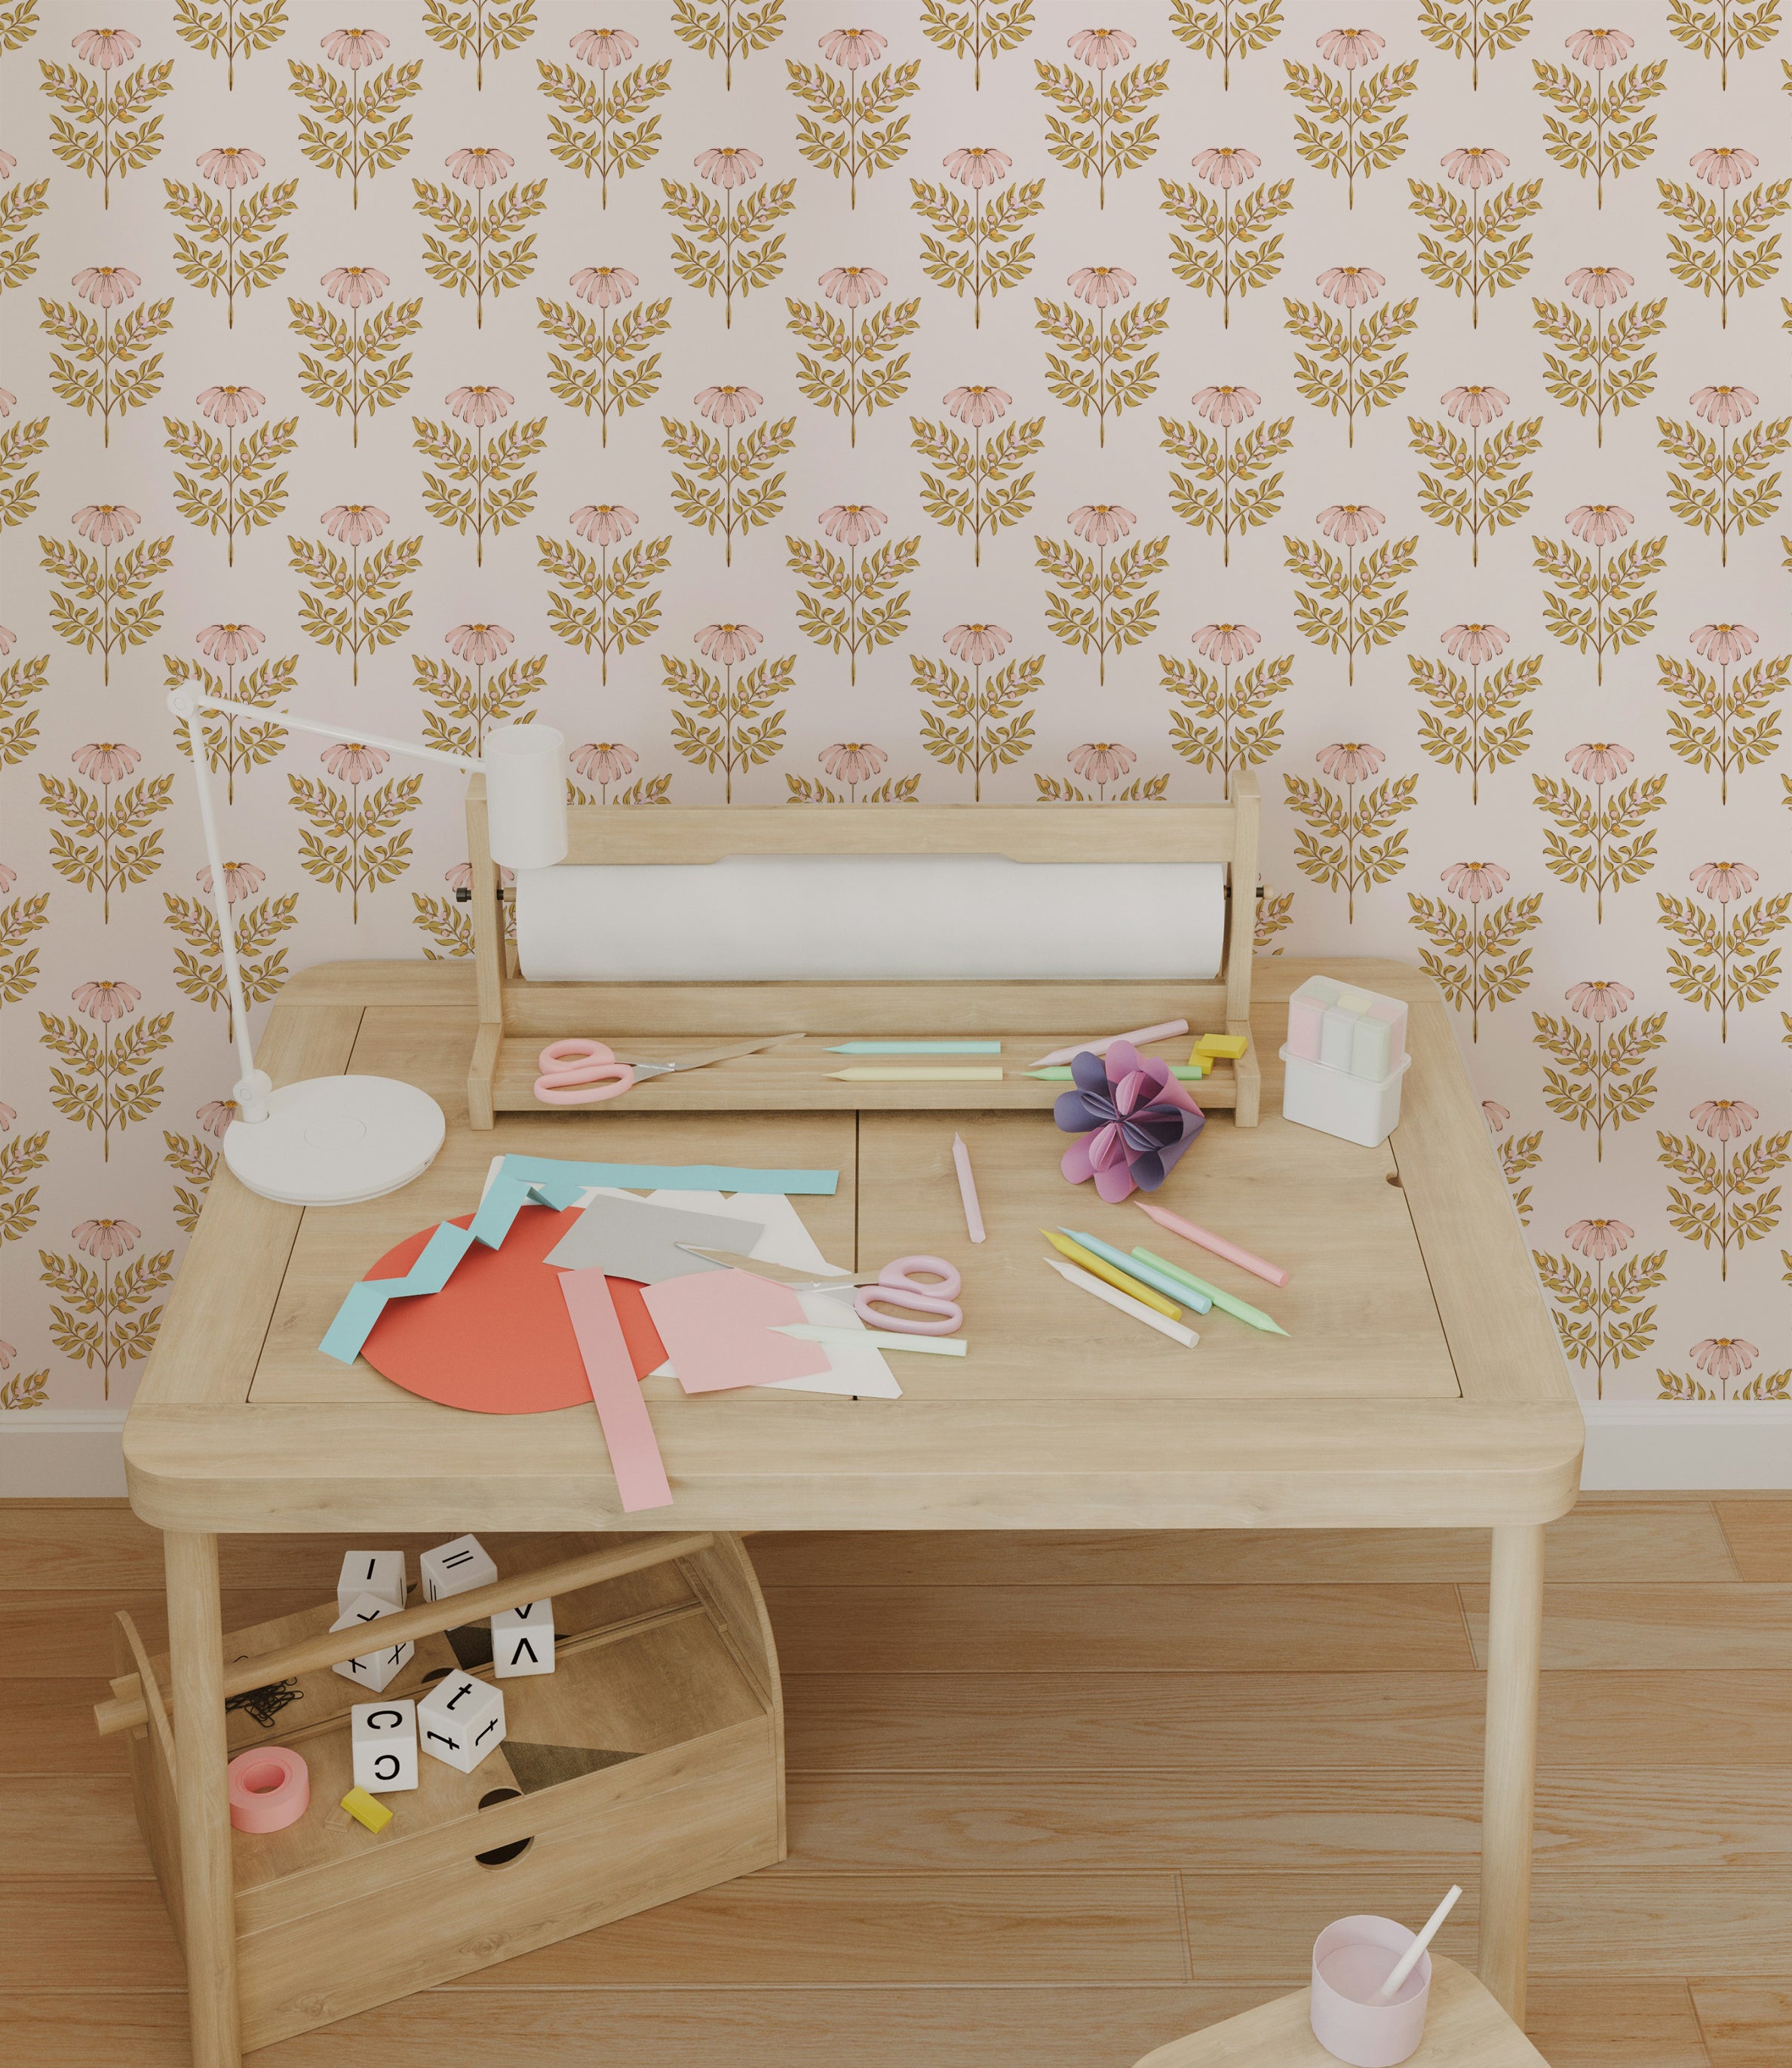 A vibrant and artistic workspace featuring the Ditsy Daisy Wallpaper - Small, adorned with a pattern of small pink daisies and golden foliage against a pale background. The room includes a wooden desk cluttered with craft supplies, emphasizing a creative and playful environment.